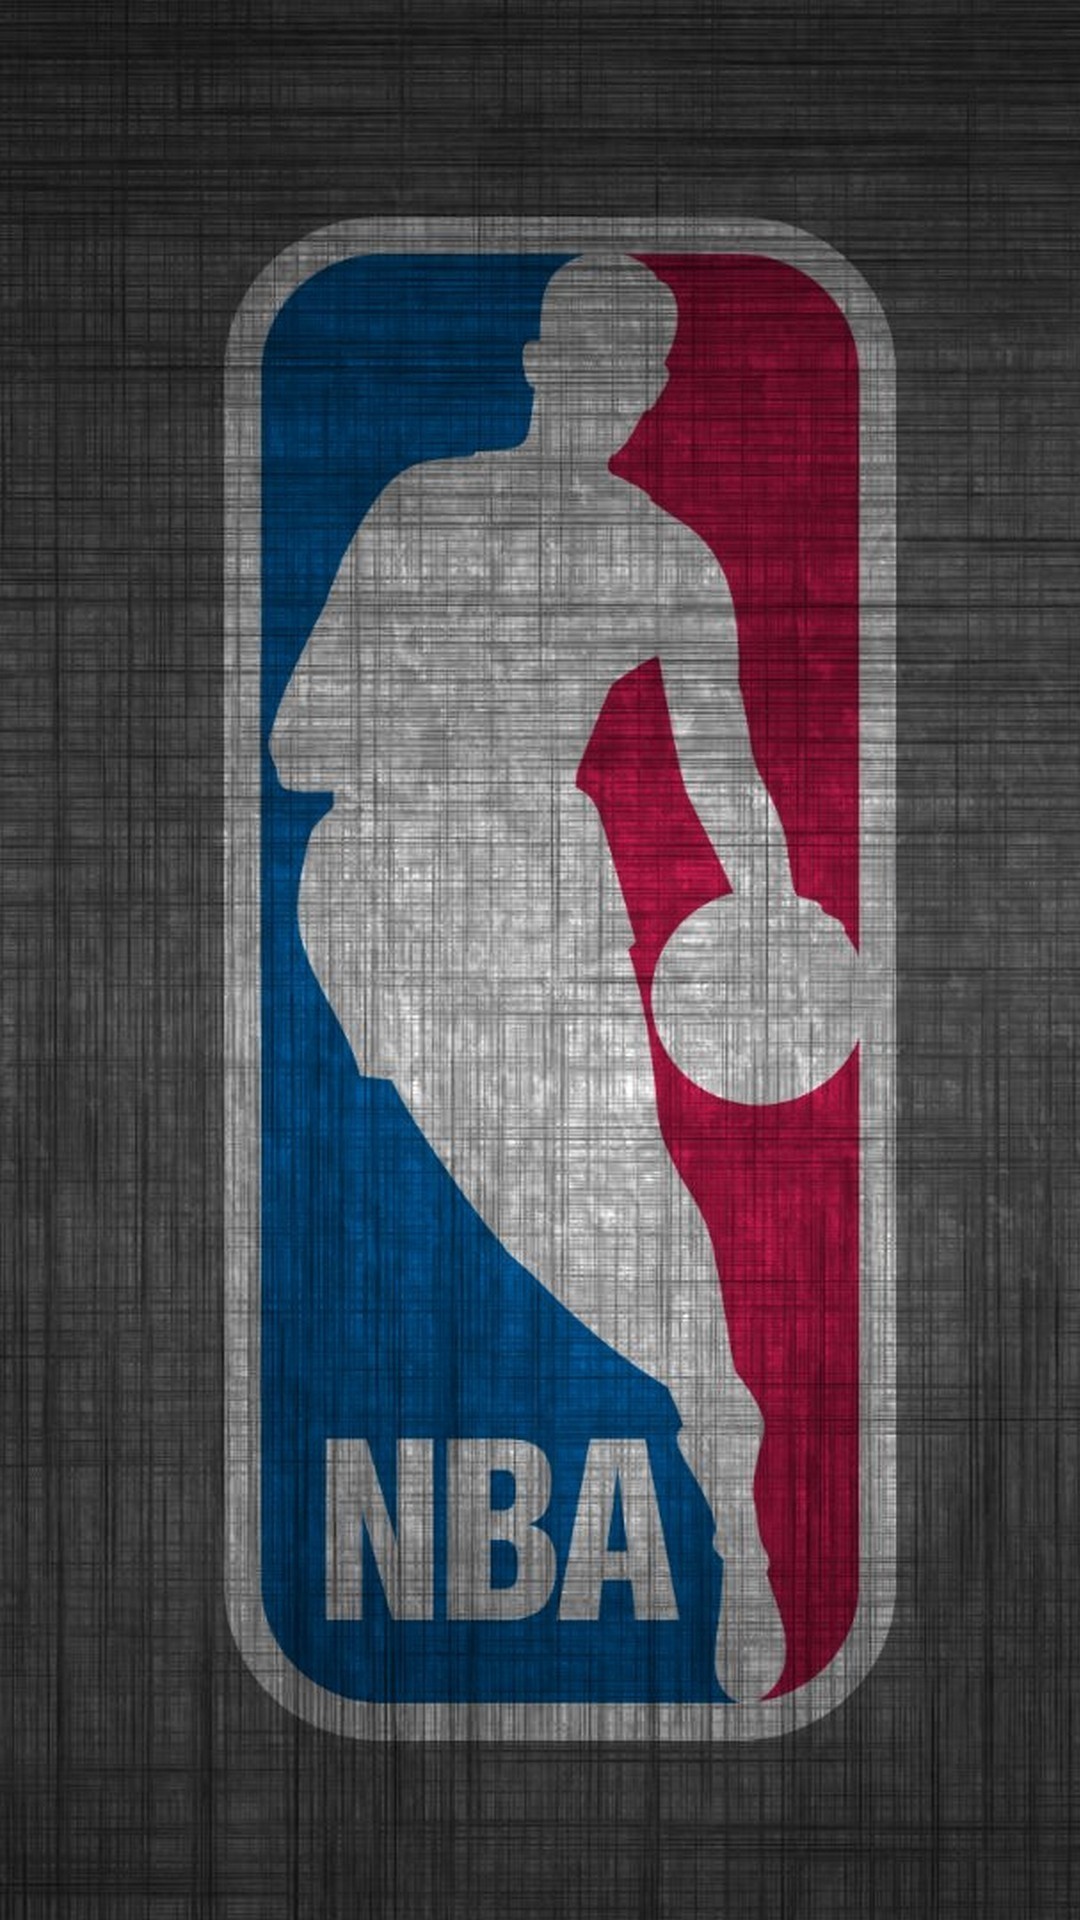 1080x1920 NBA Wallpaper Mobile with image dimensions  pixel. You can make  this wallpaper for your